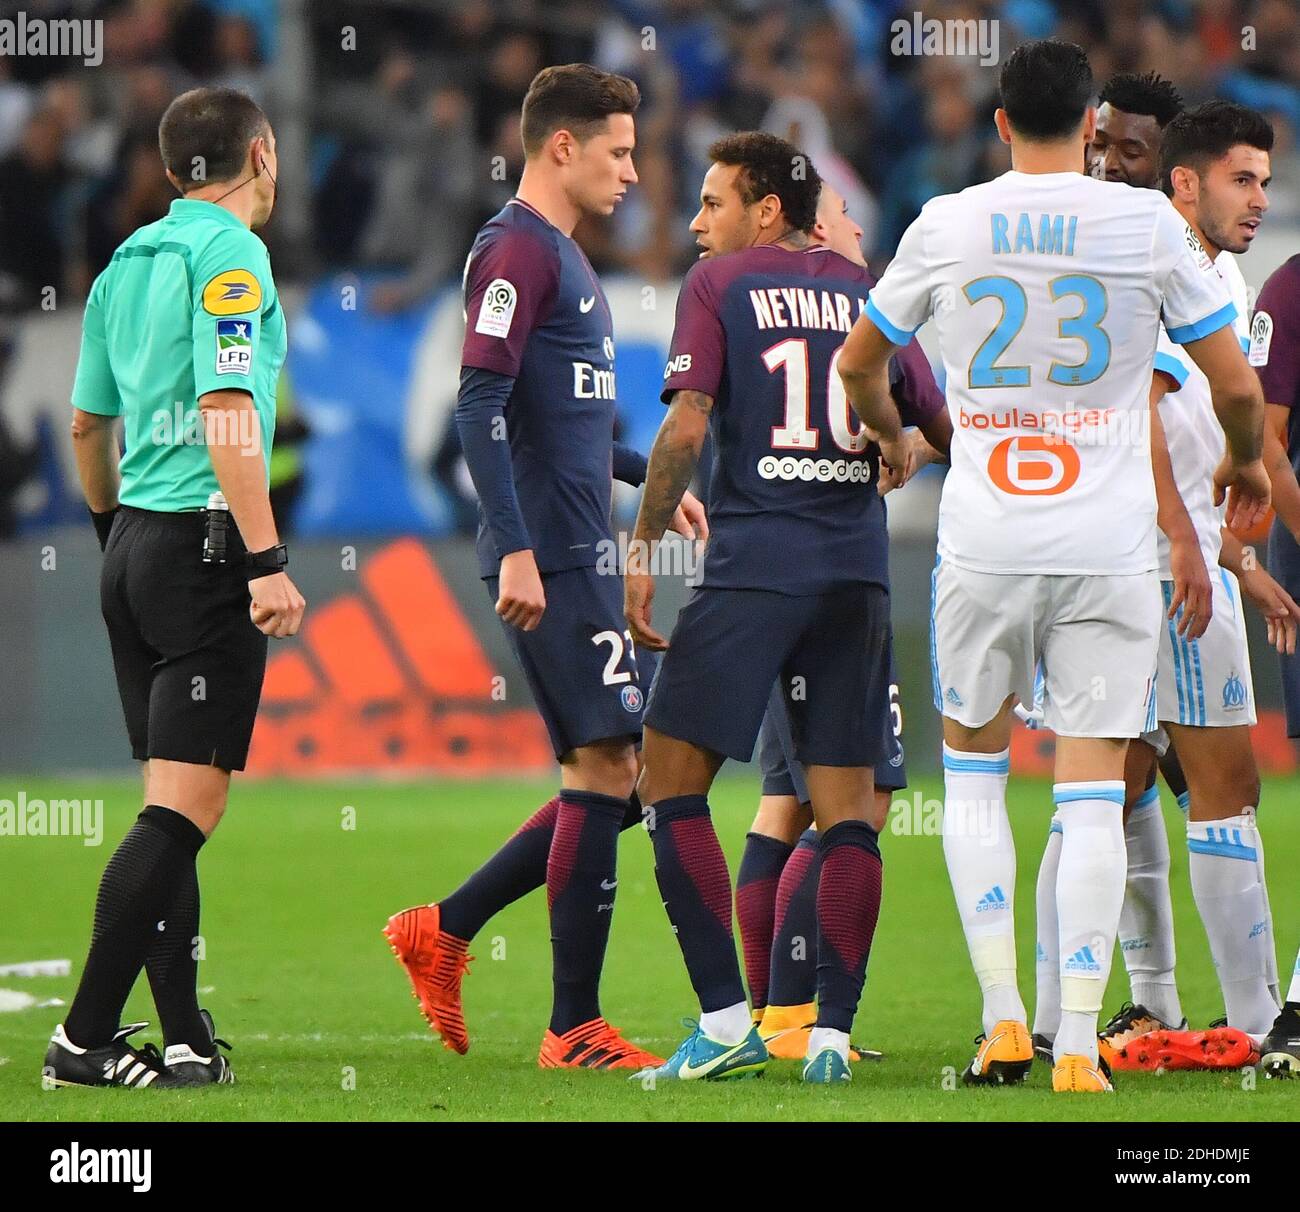 Paris Saint-Germain's Neymar Jr gets a red card during the French Ligue 1  Olympique de Marseille (OM) v Paris Saint-Germain (PSG) football match on  October 22, 2017, at the Velodrome Stadium in